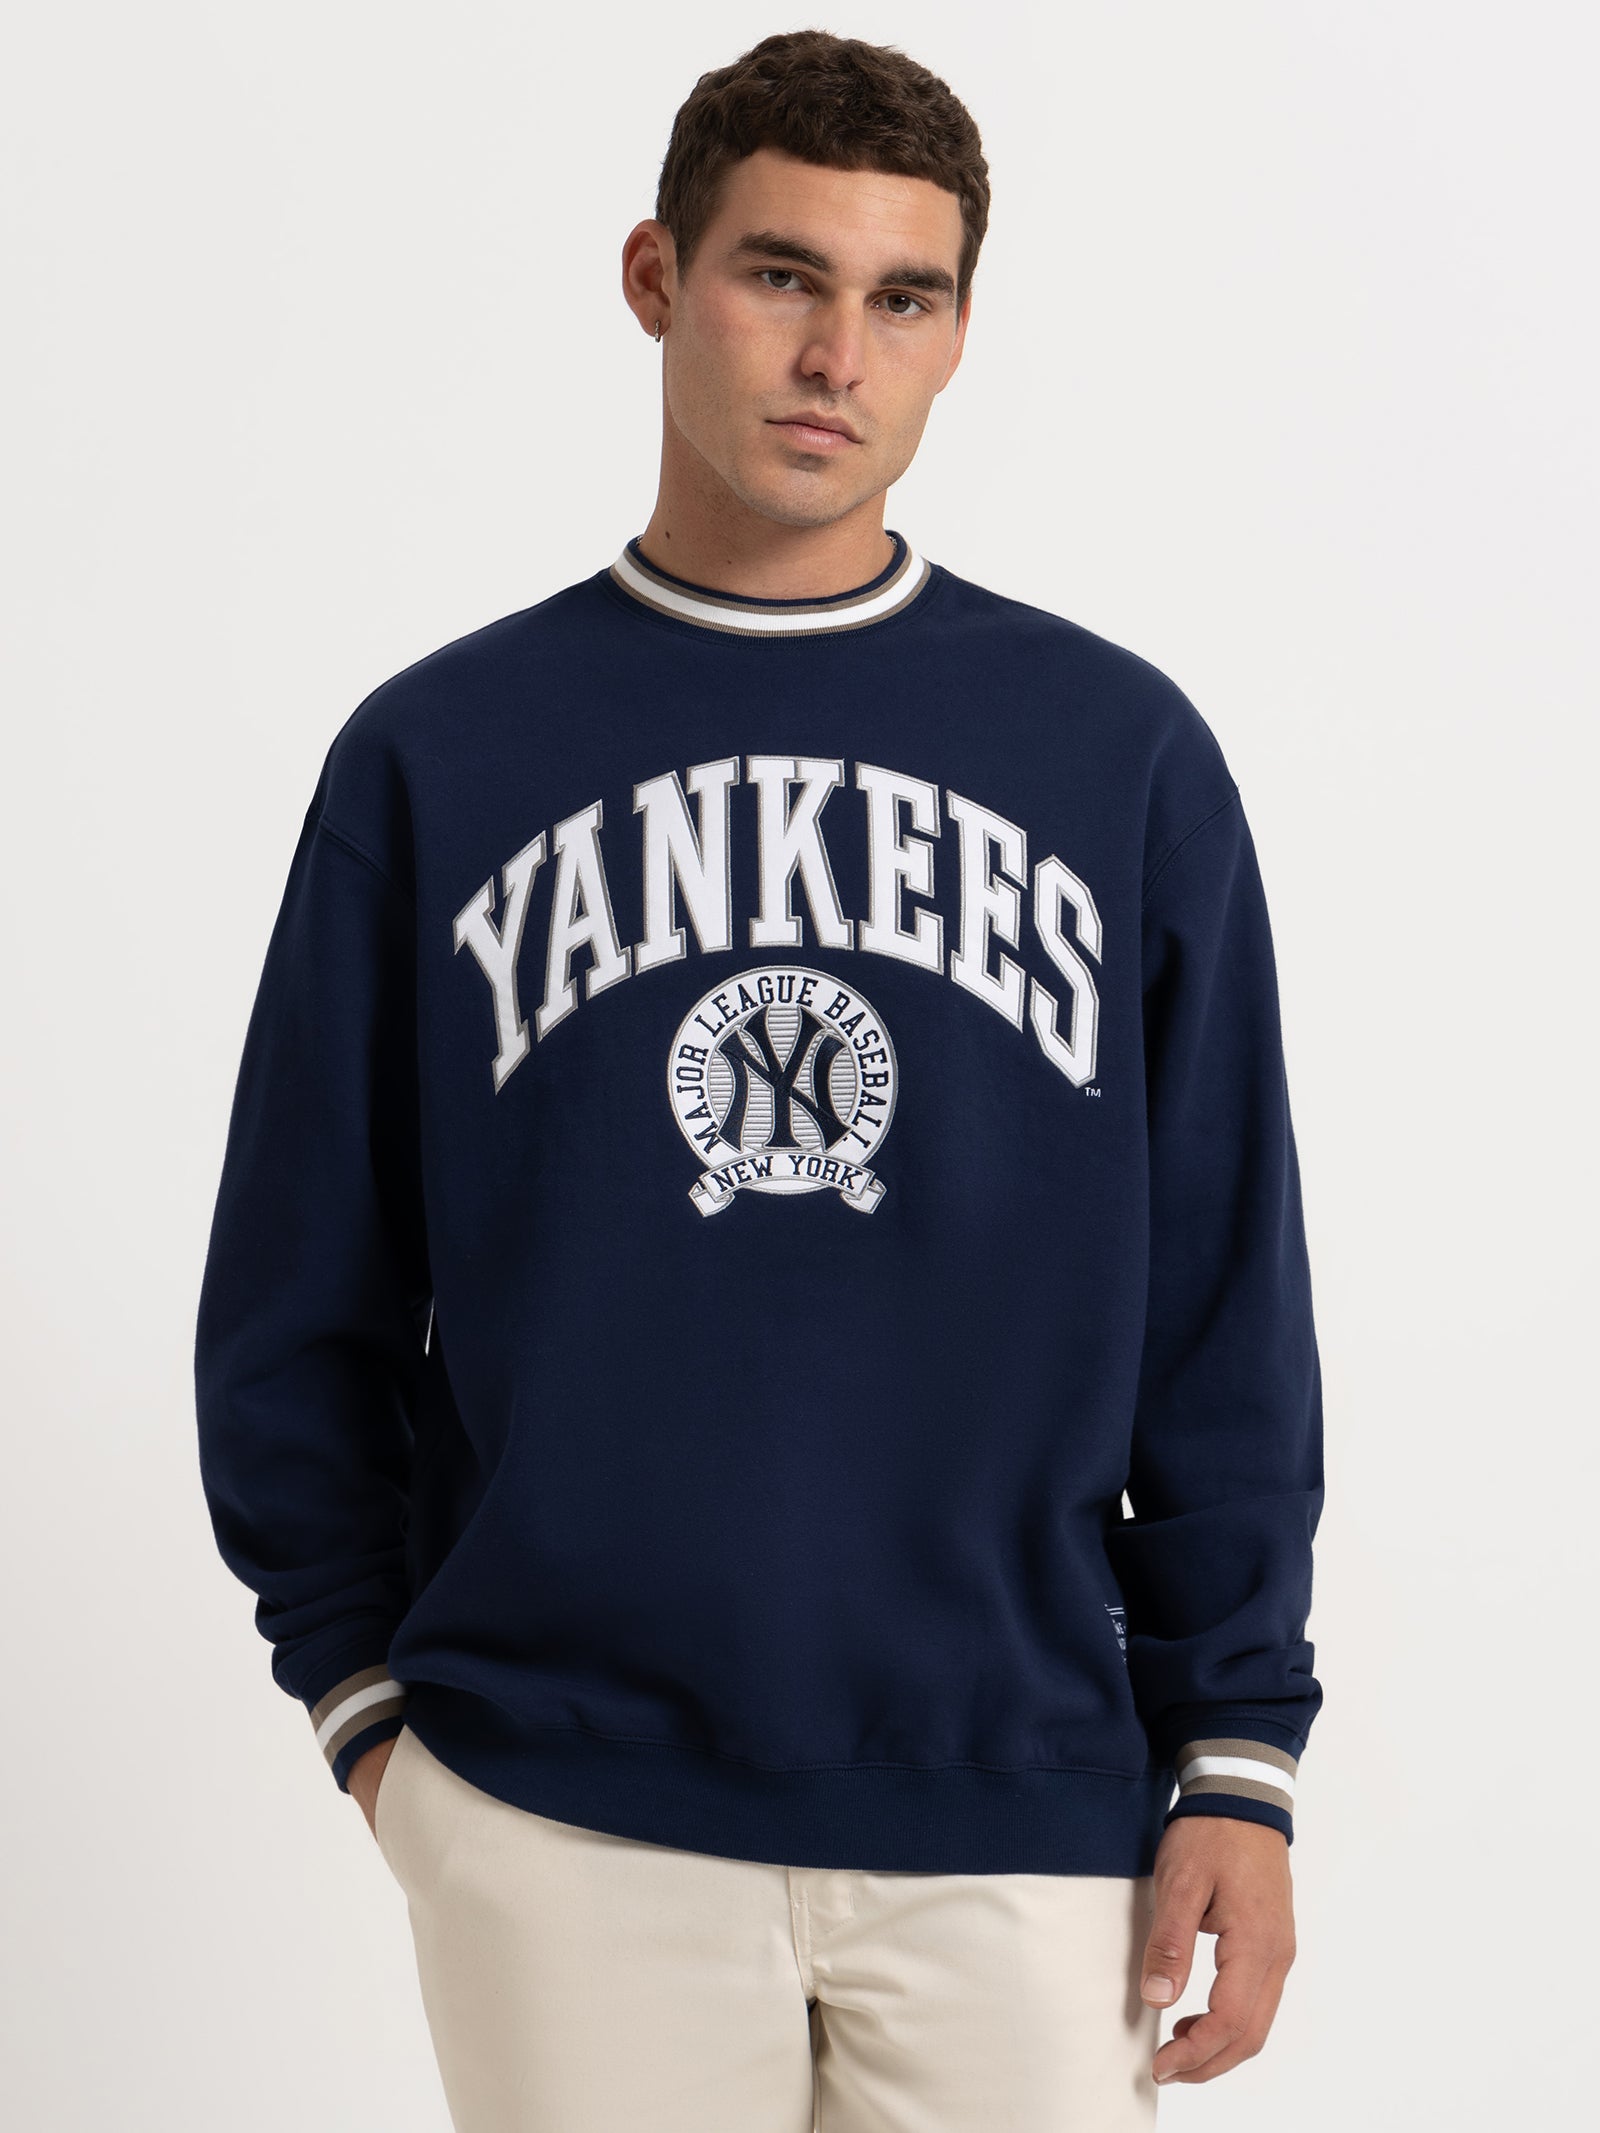 NEW POLO Ralph Lauren Men's LIMITED MLB Collection Yankees NY